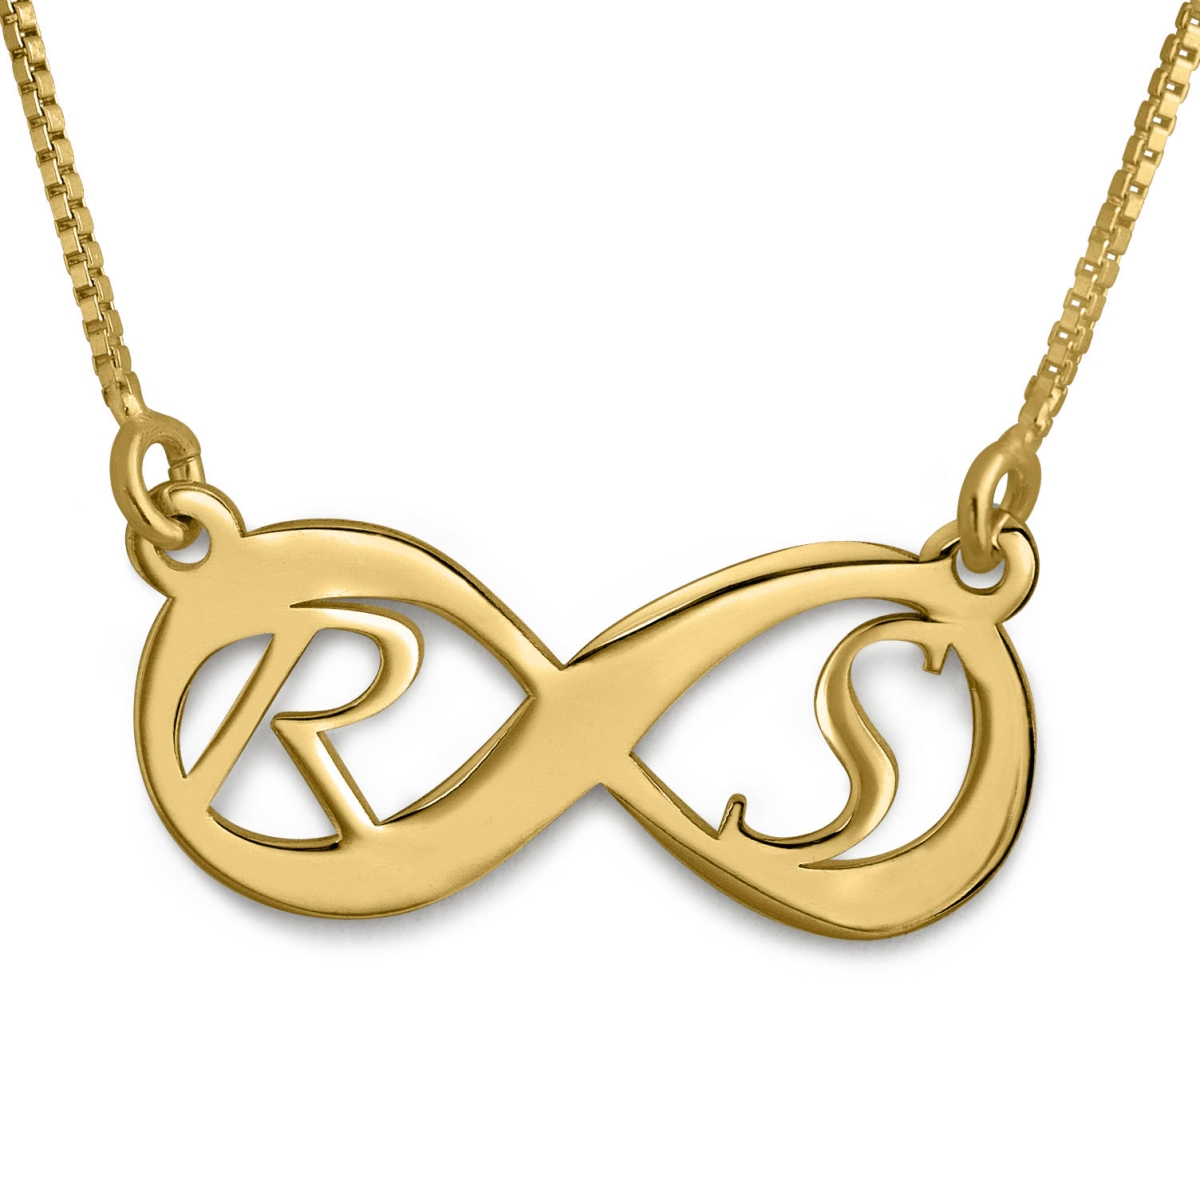 Infinity Love Necklace, Double Initials, 24k Gold Plated